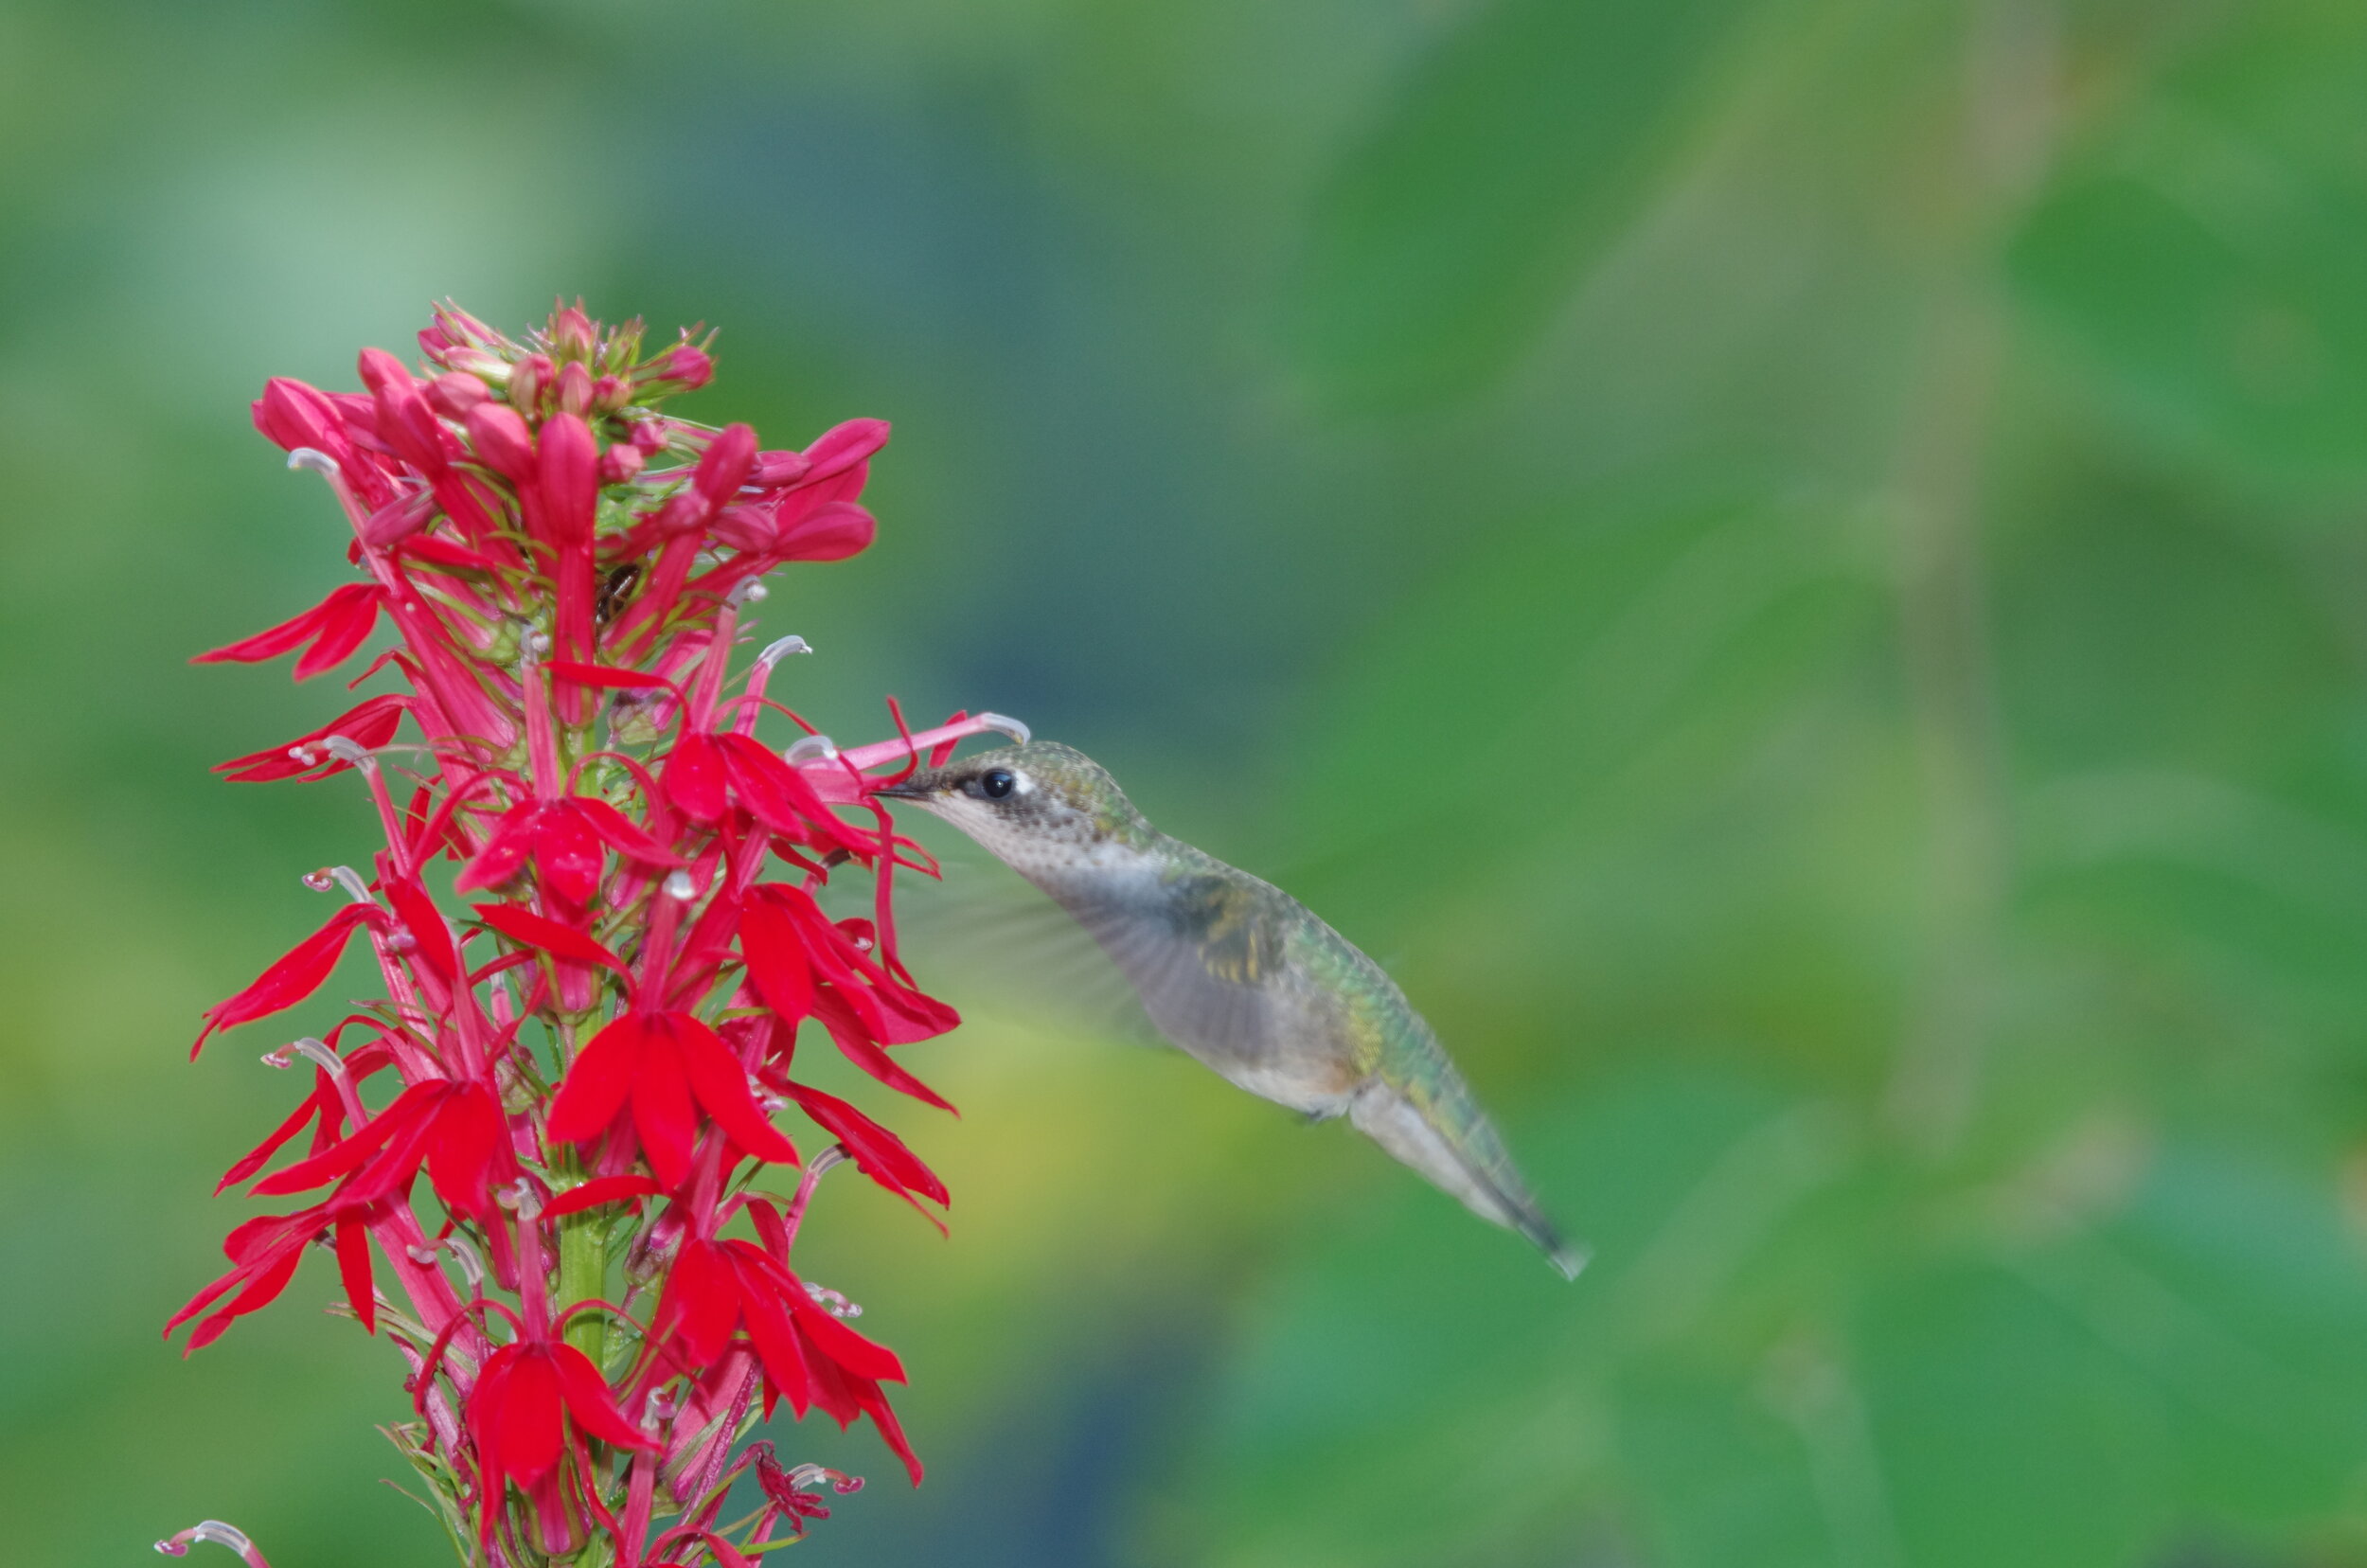 A hummingbird feeds at a Cardinal flower, an excellent source of food that flowers later in the season providing nectar for the fall migration.